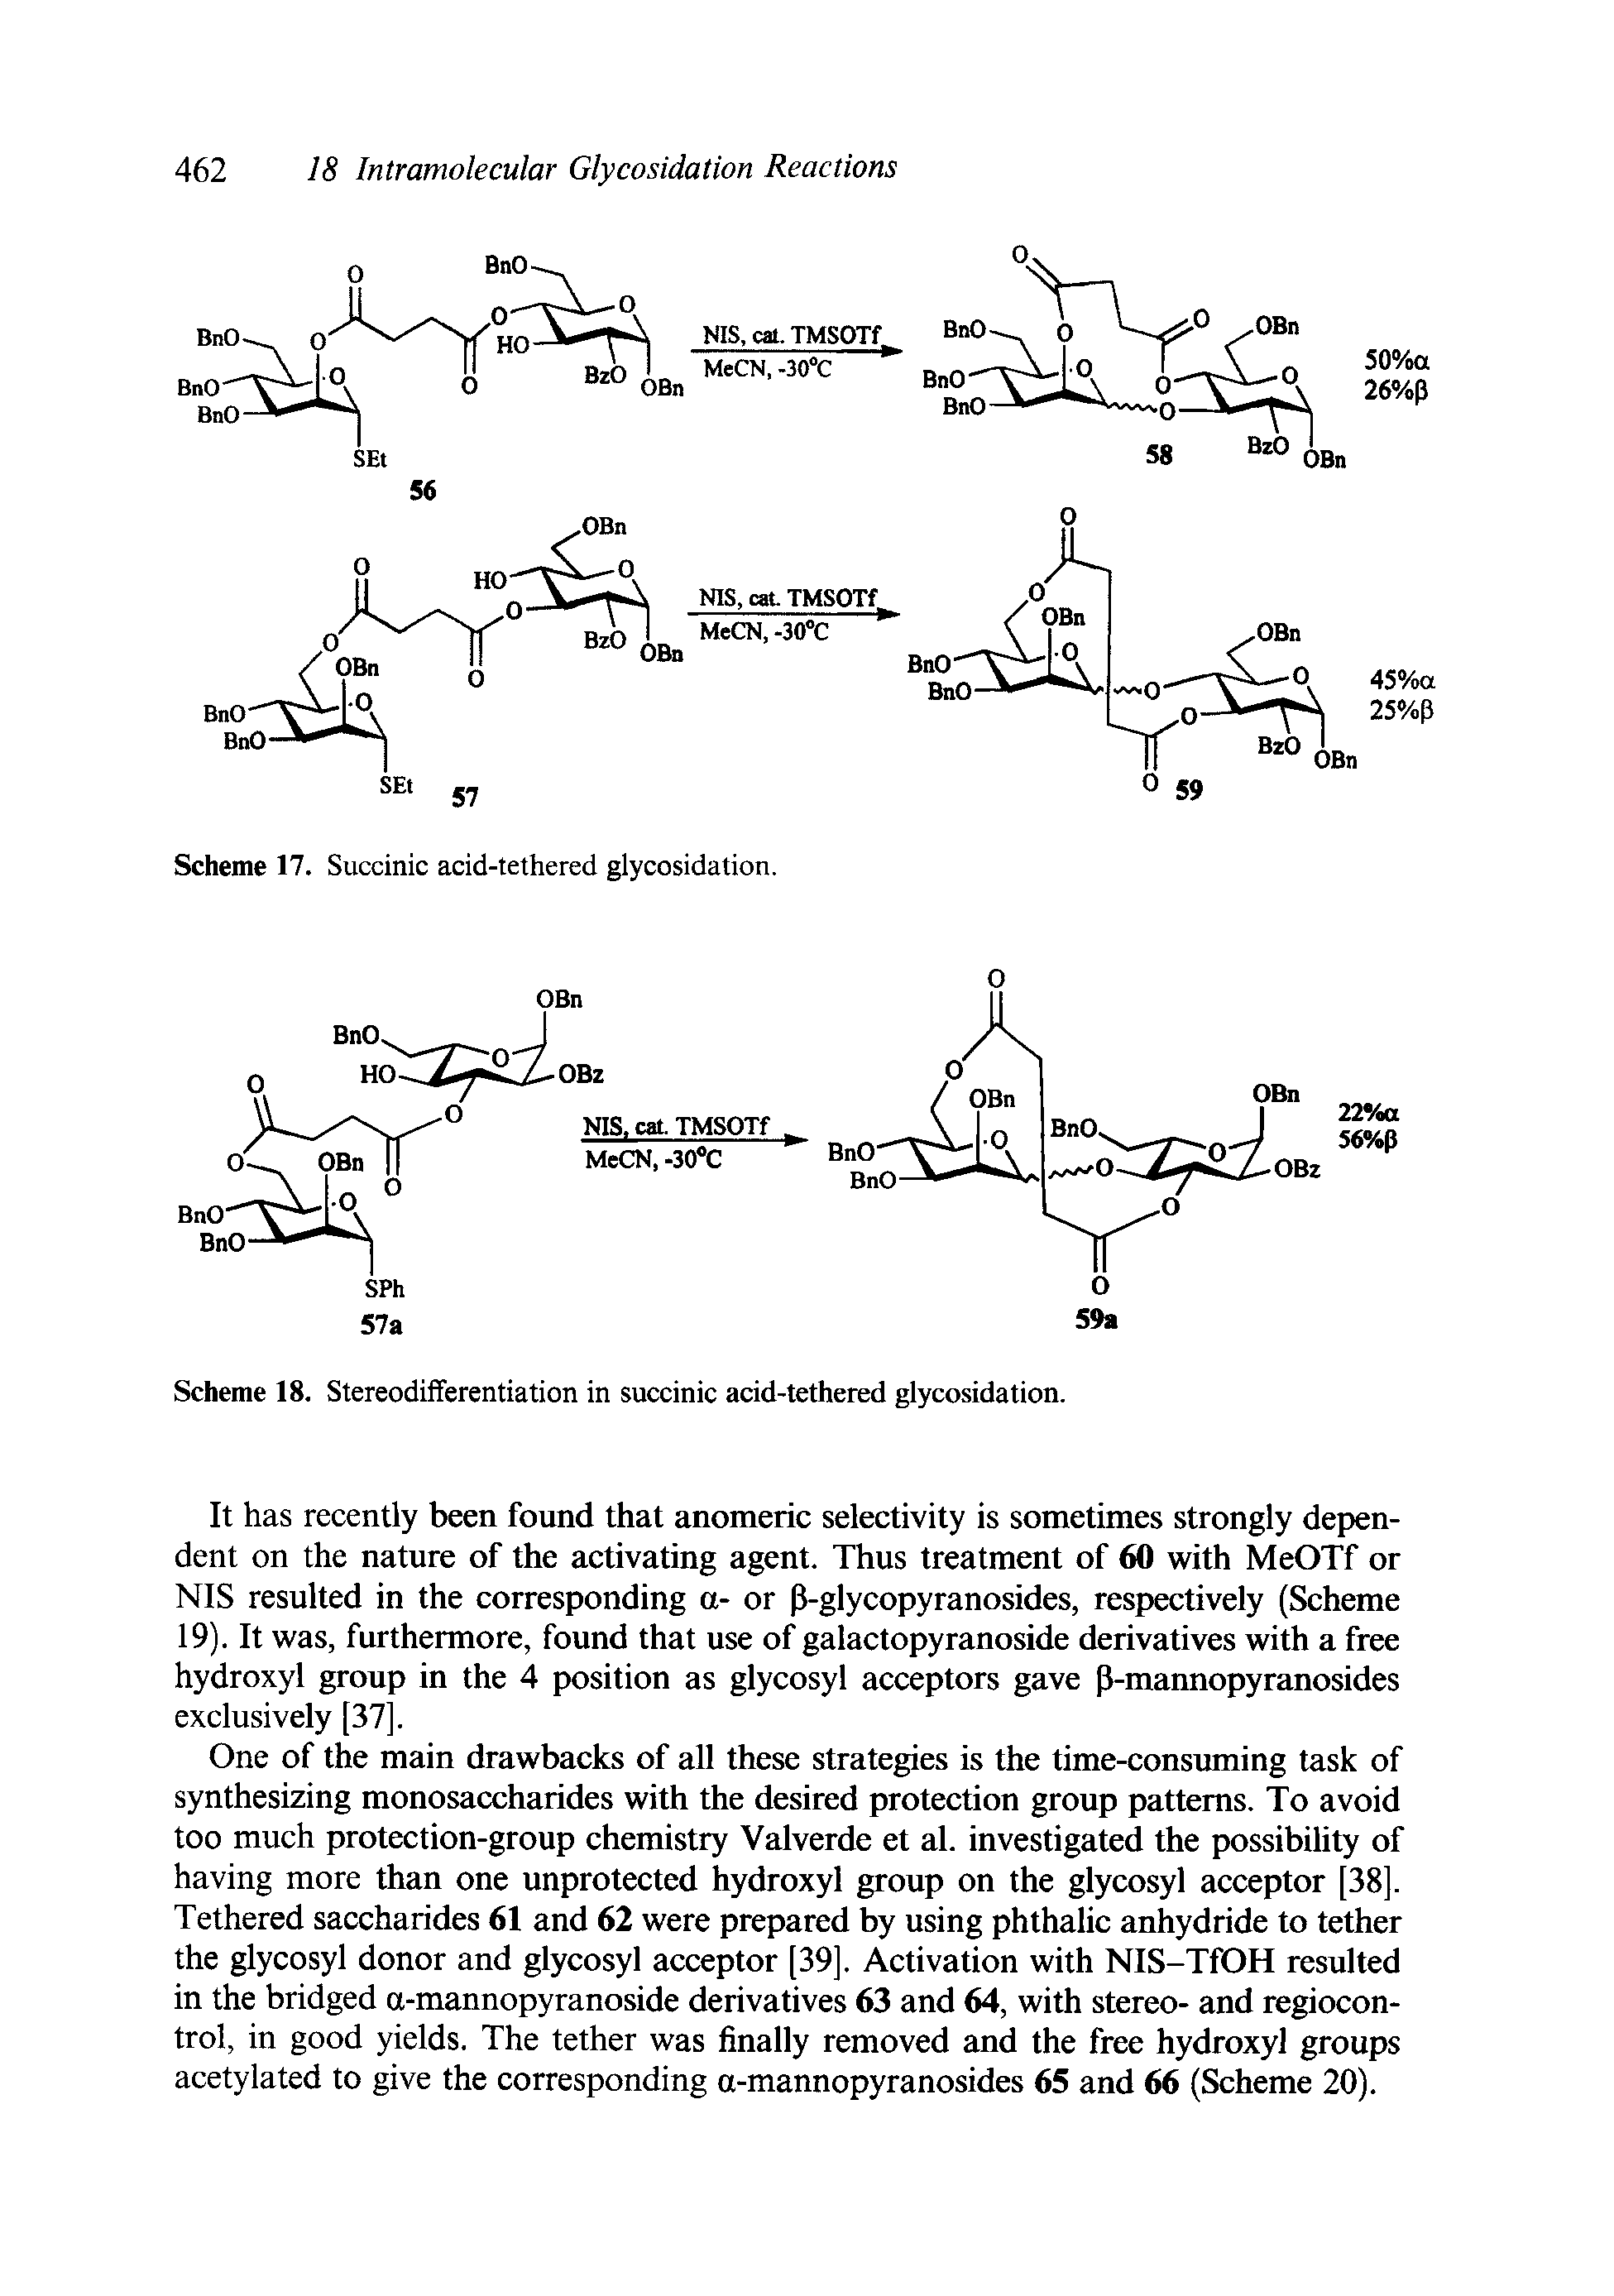 Scheme 18. Stereodifferentiation in succinic acid-tethered glycosidation.